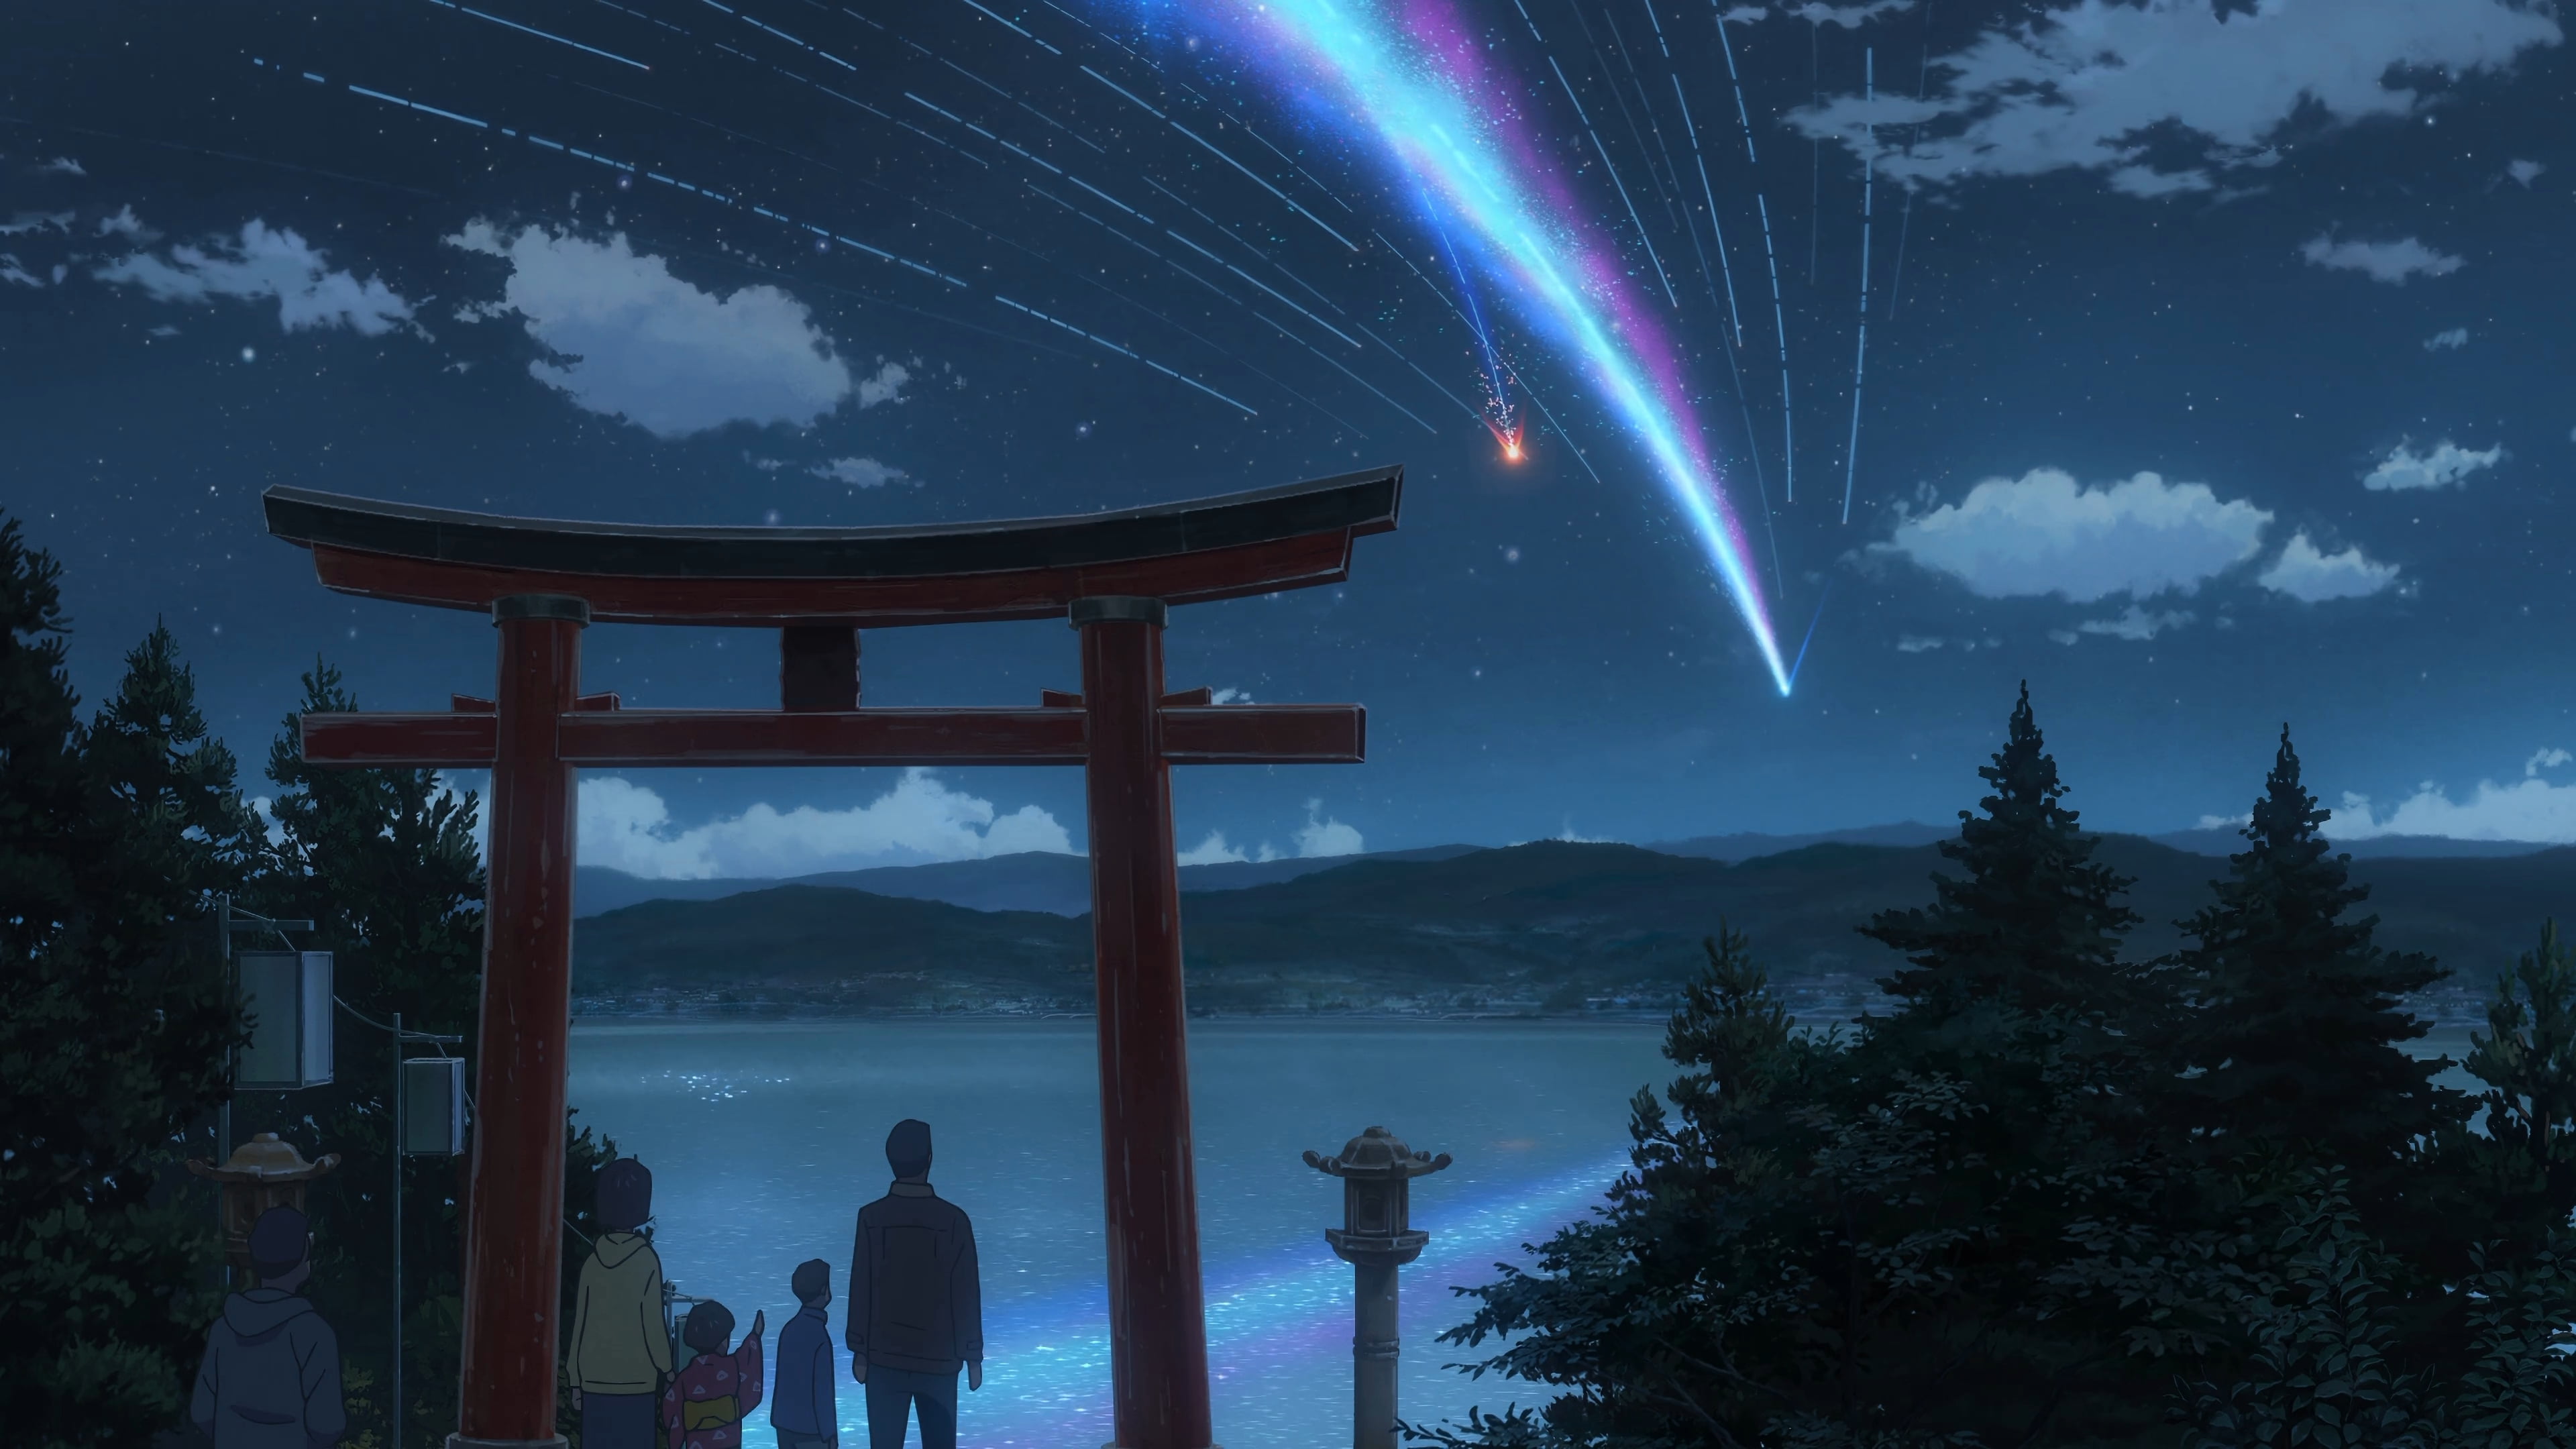 Your Name Meteor Movie Still Hd Wallpaper Wallpaper Flare